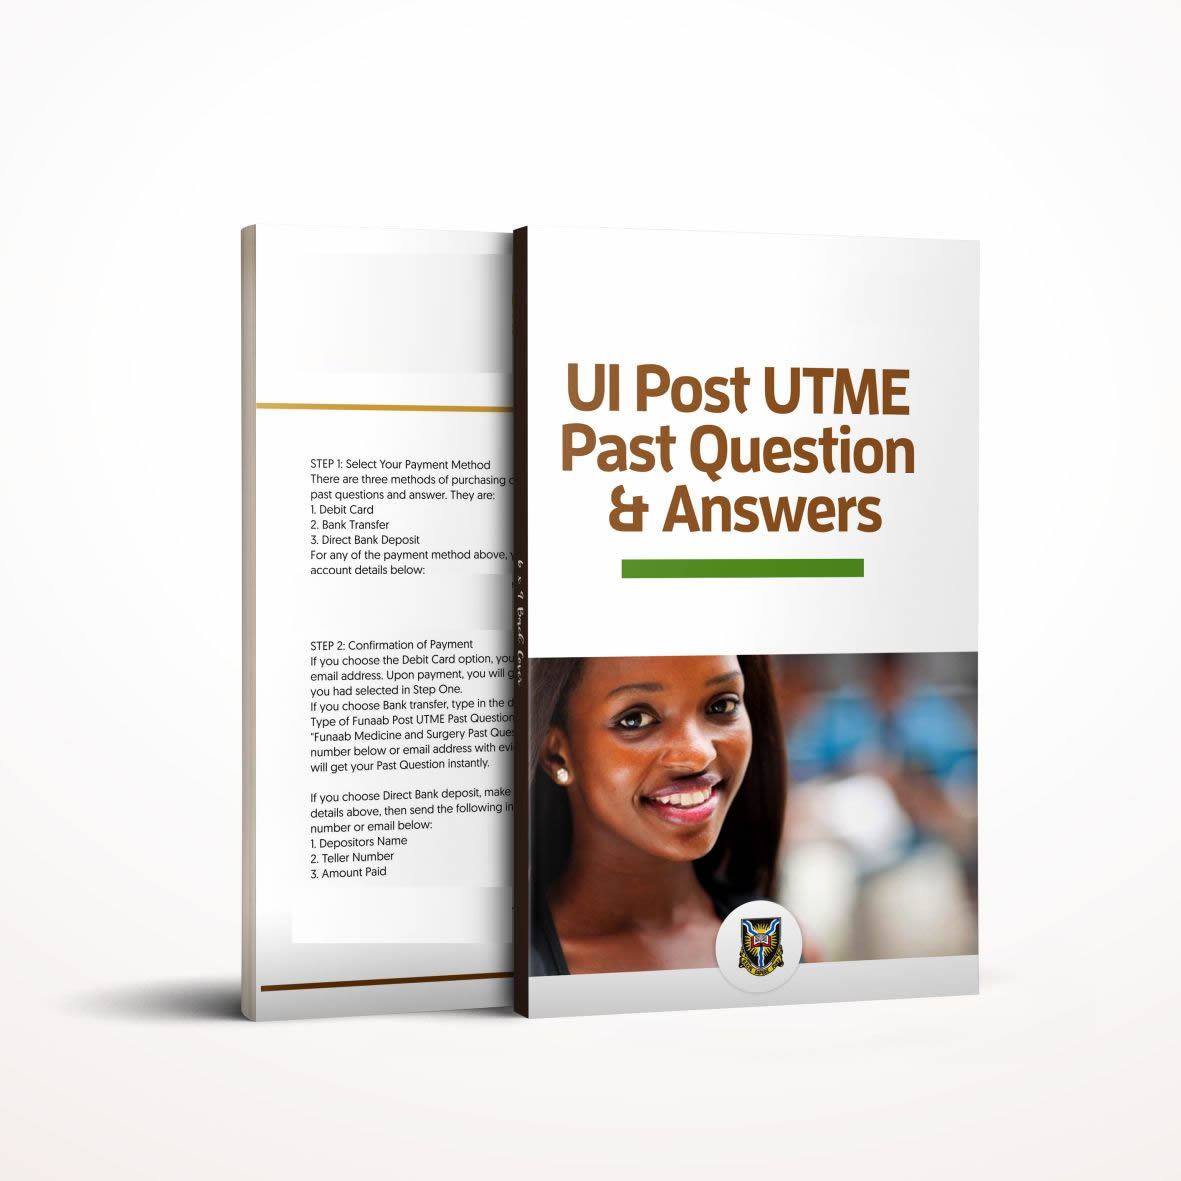 UI Post UTME past questions and answers